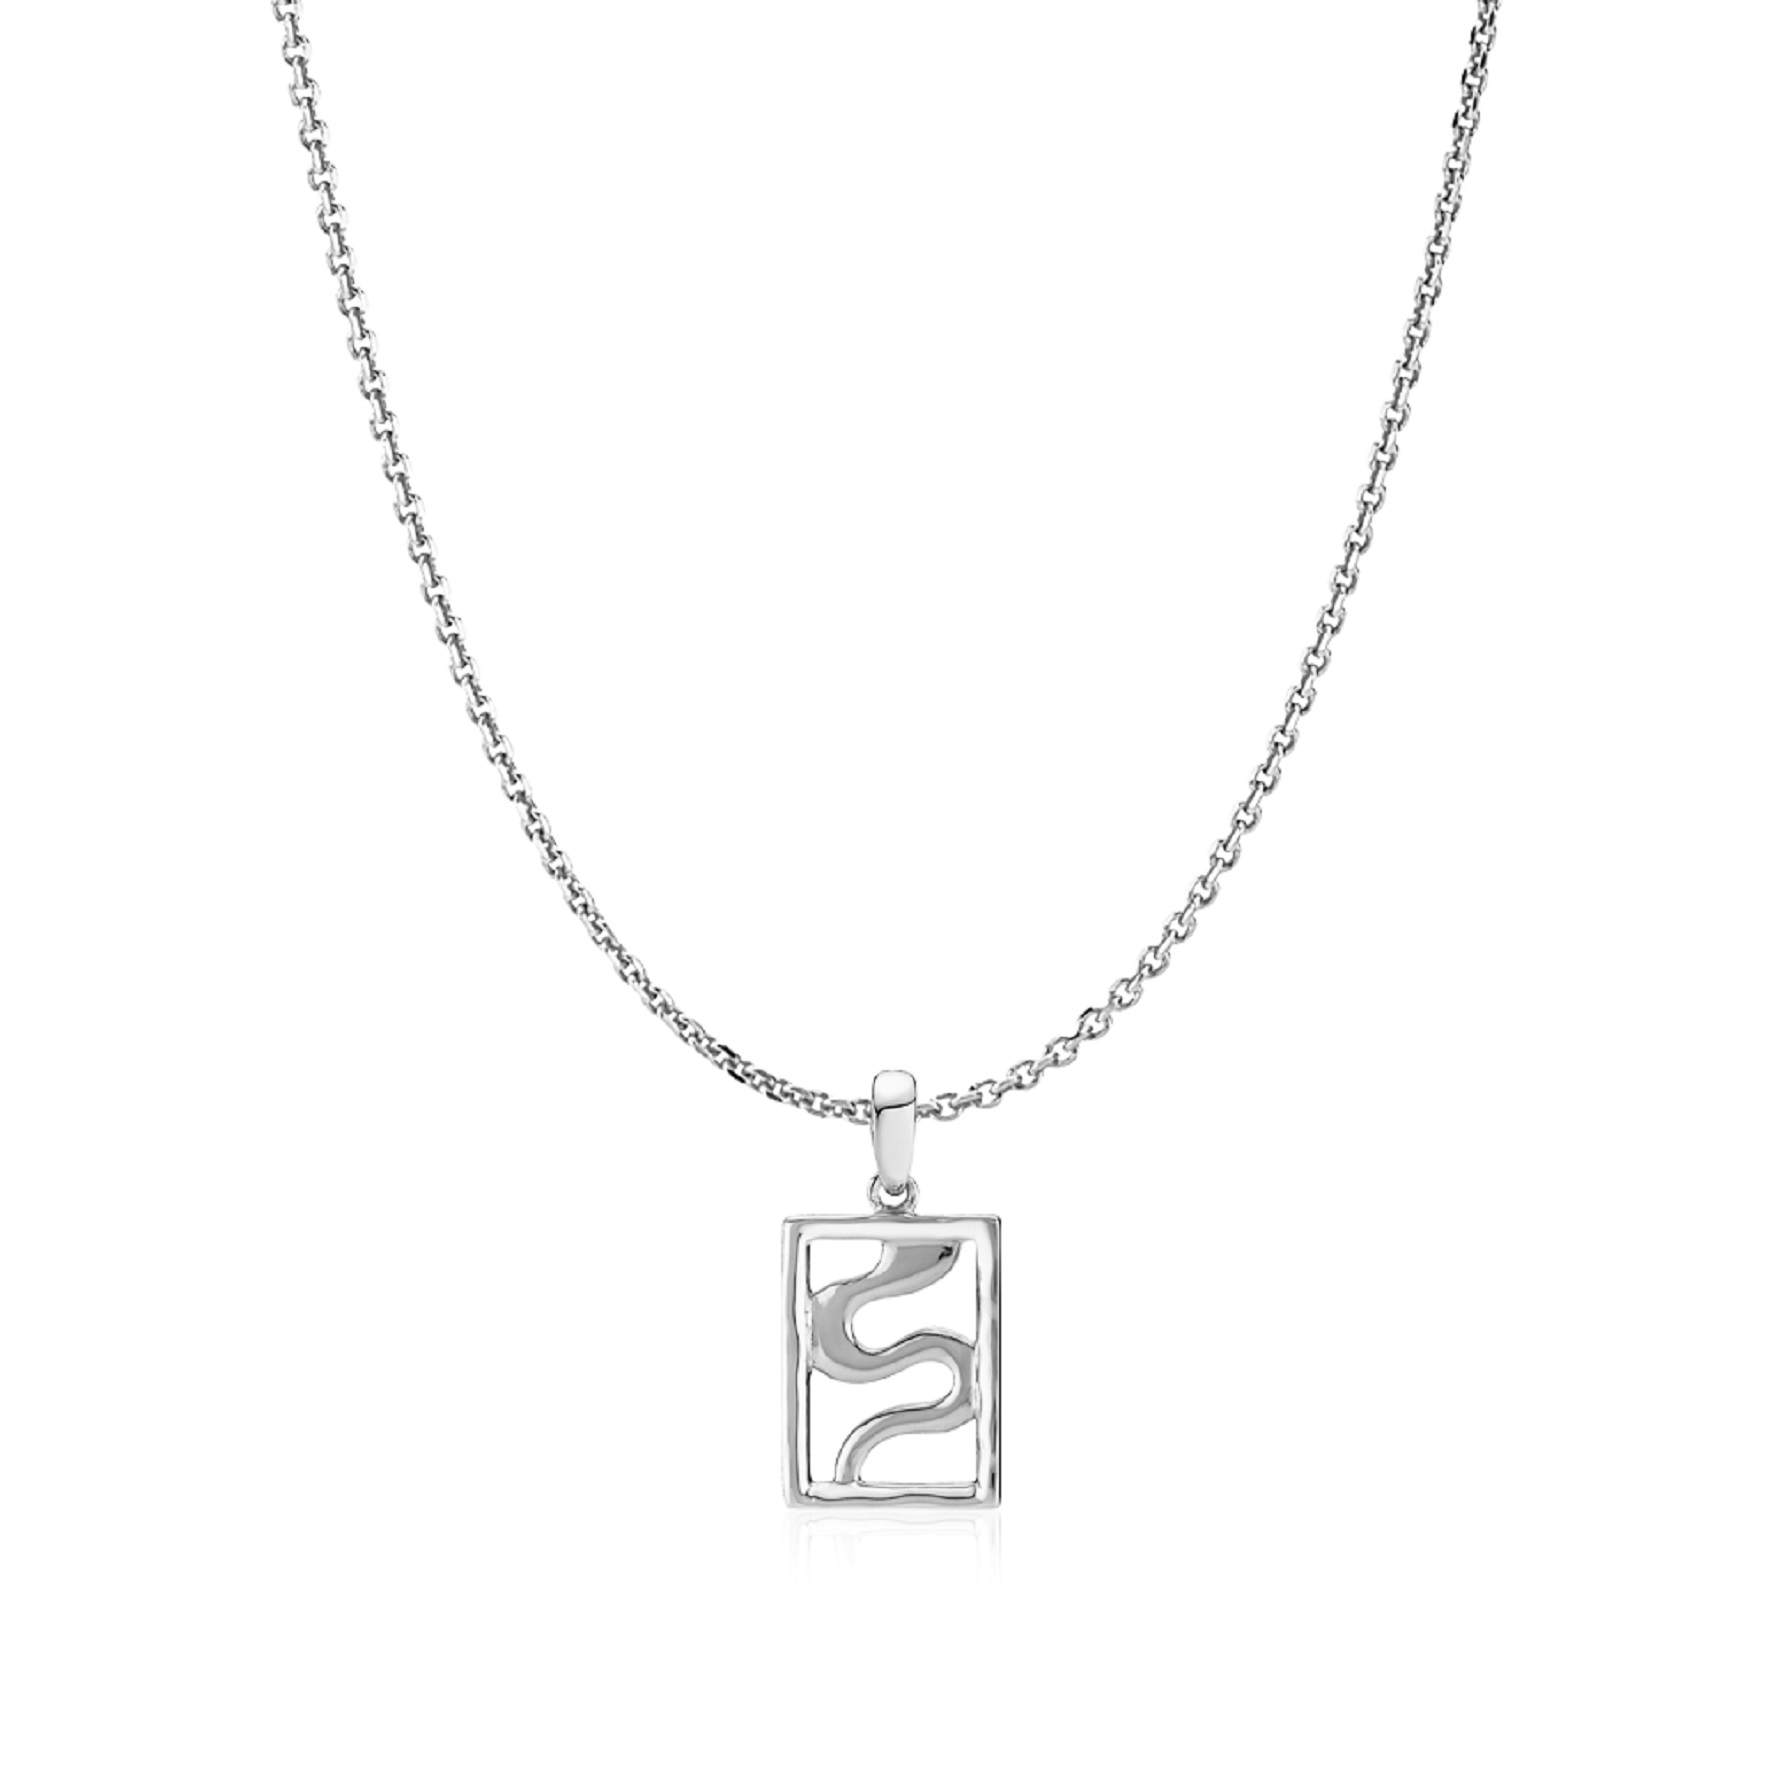 Kathrine Fisker by Sistie Necklace